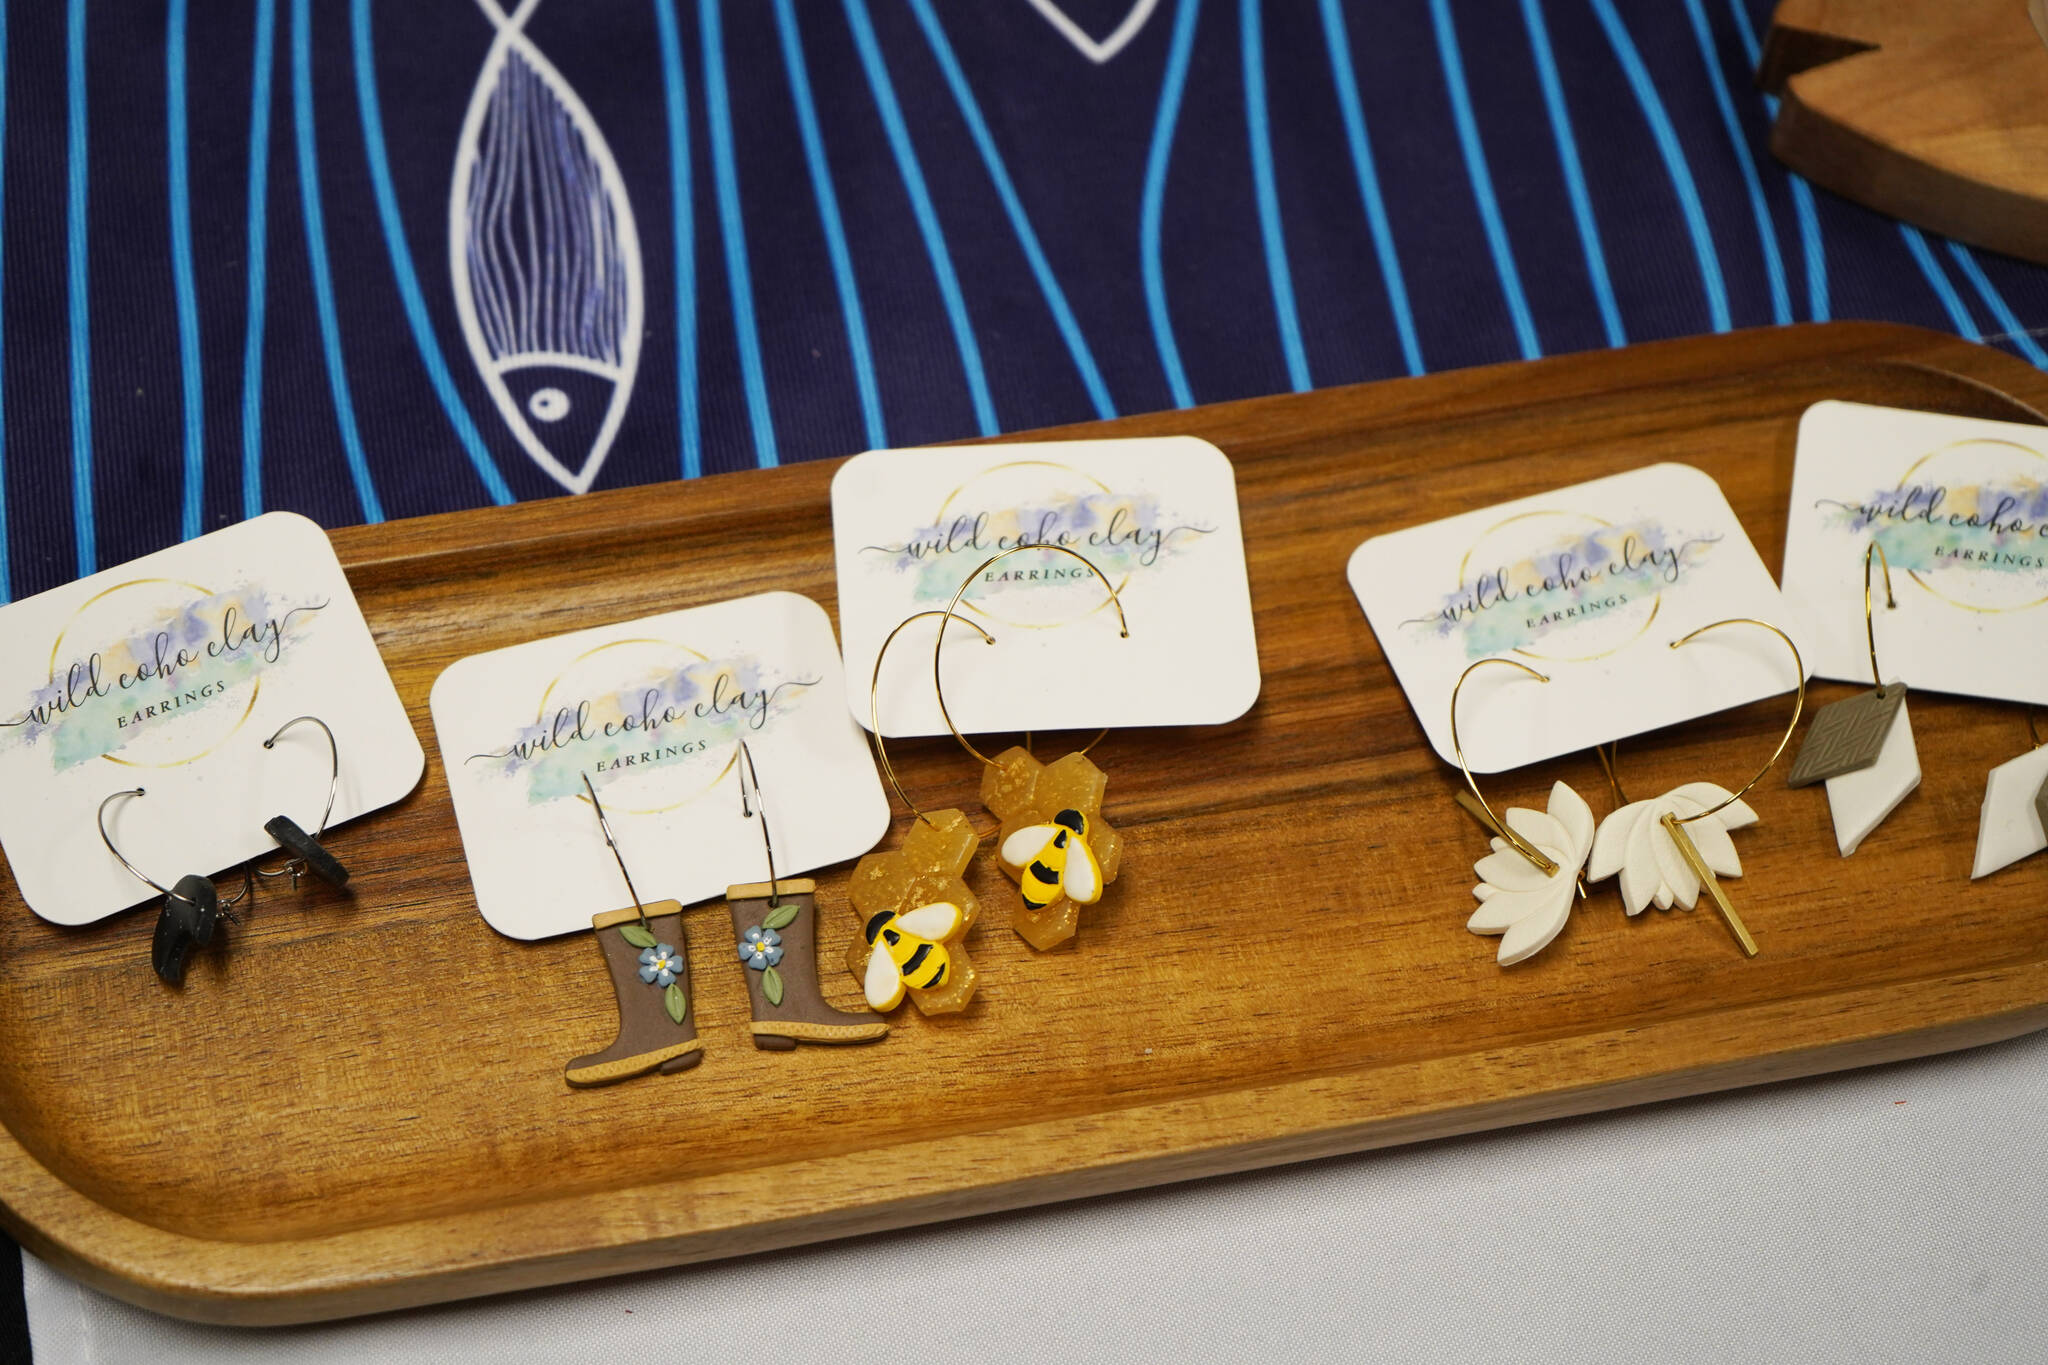 Ceramic earrings made by Michelle Carmichael are displayed at the Kenai Peninsula Sport, Rec & Trade Show on Saturday, May 6, 2023, at the Soldotna Regional Sports Complex in Soldotna, Alaska. (Jake Dye/Peninsula Clarion)